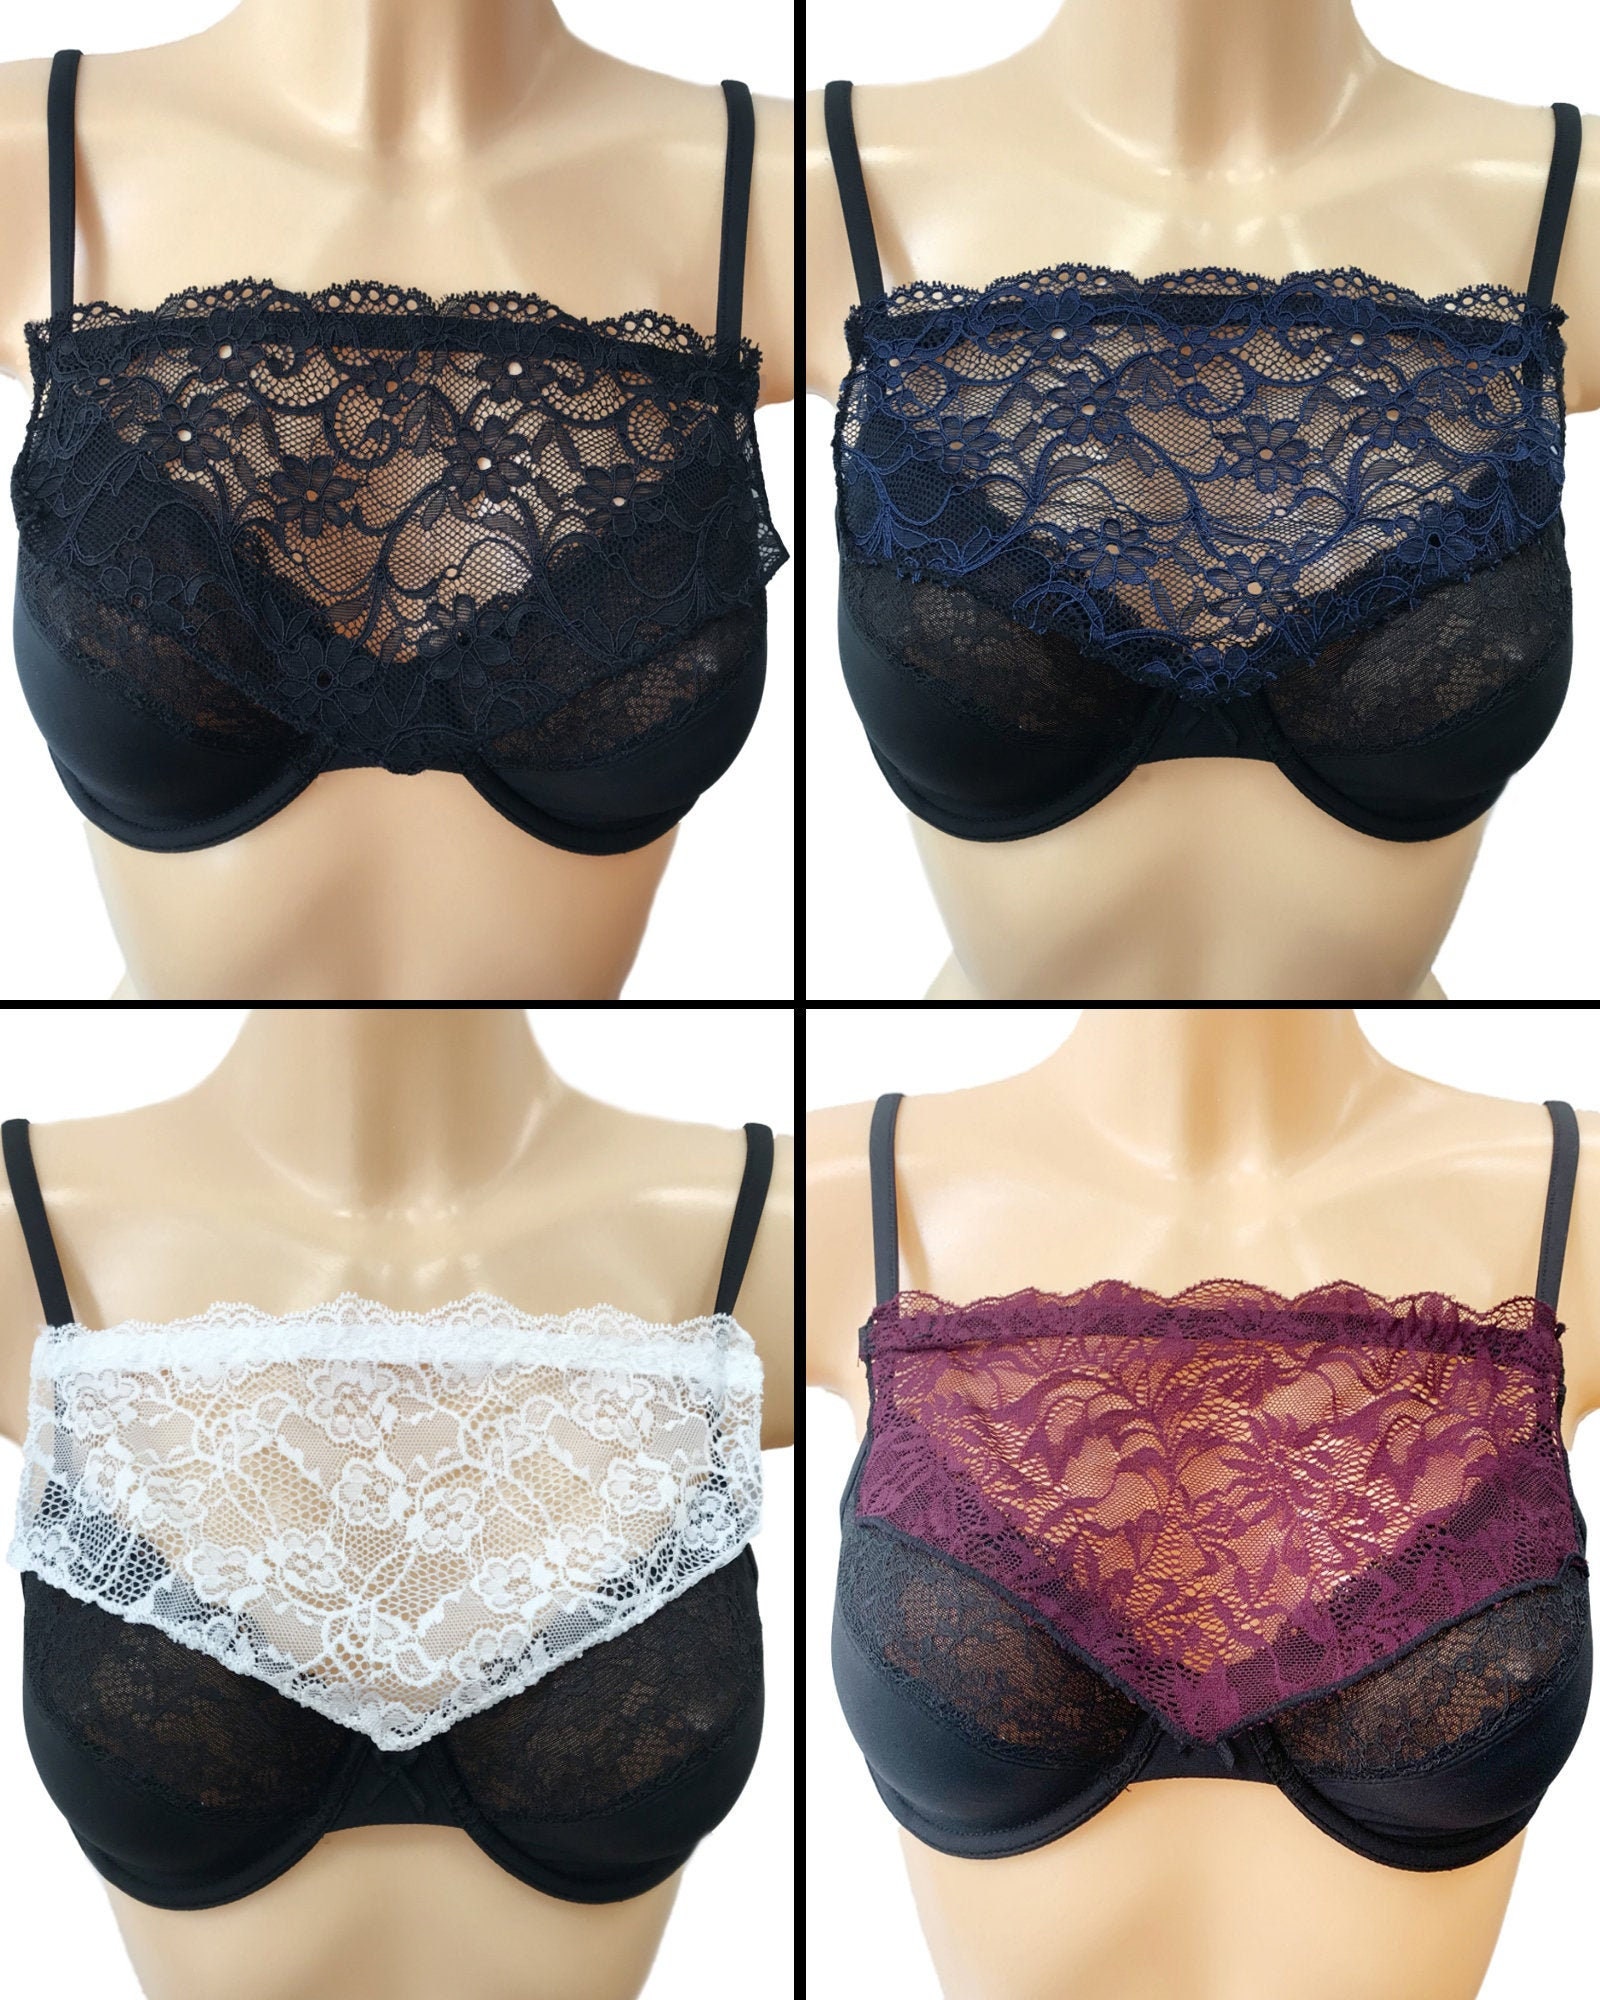 Modesty Panel Lace Bra Insert Instant Camisole Cleavage Cover Black Navy  White Purple -  Denmark